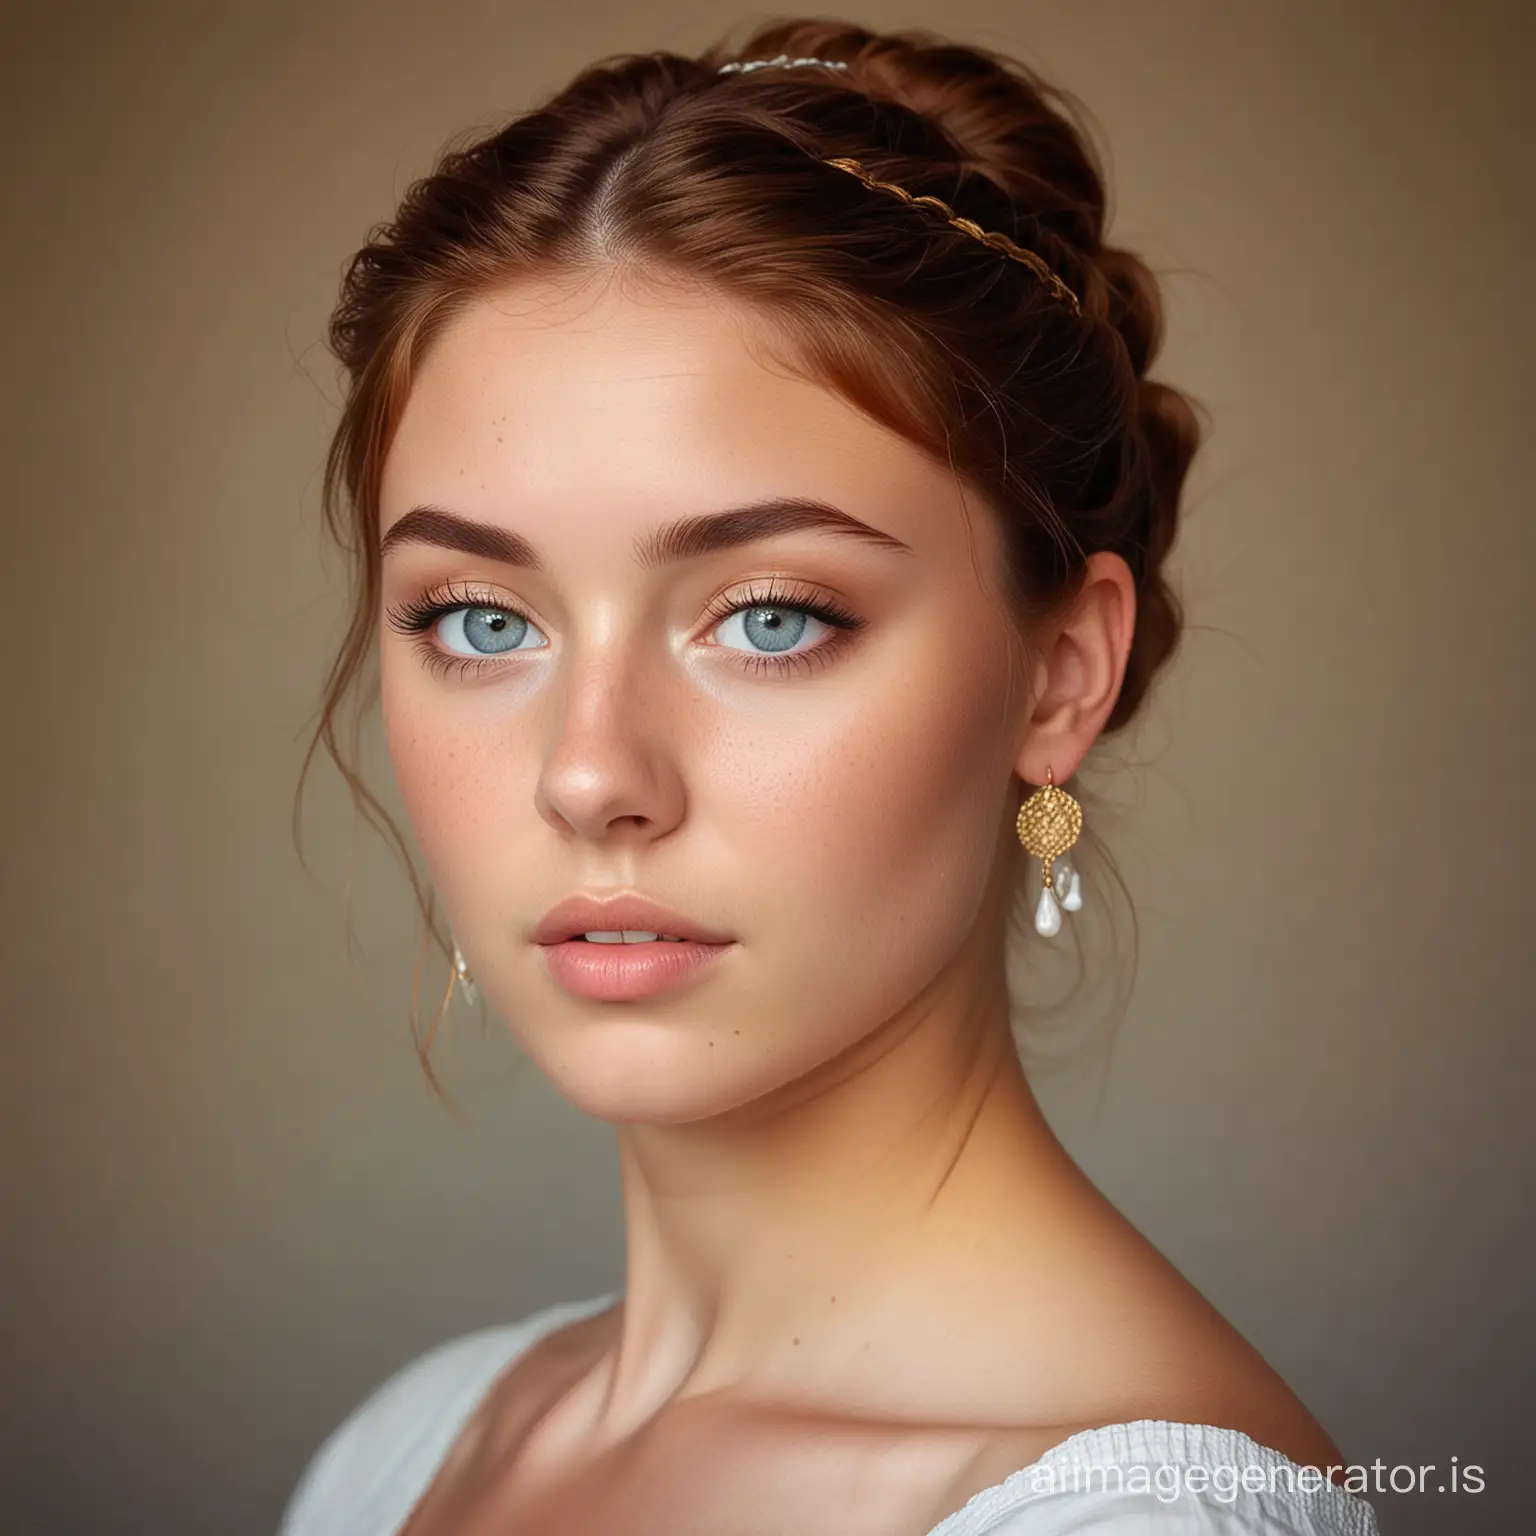 Very pretty girl, 16 years old, auburn hair in loose bun, very tanned skin, light blue eyes, slight freckles, slender, mid-height, thick eyelashes, full lips, wearing white ionic chiton from Ancient Greece, dangly gold earrings, strong physique but also feminine, beautiful